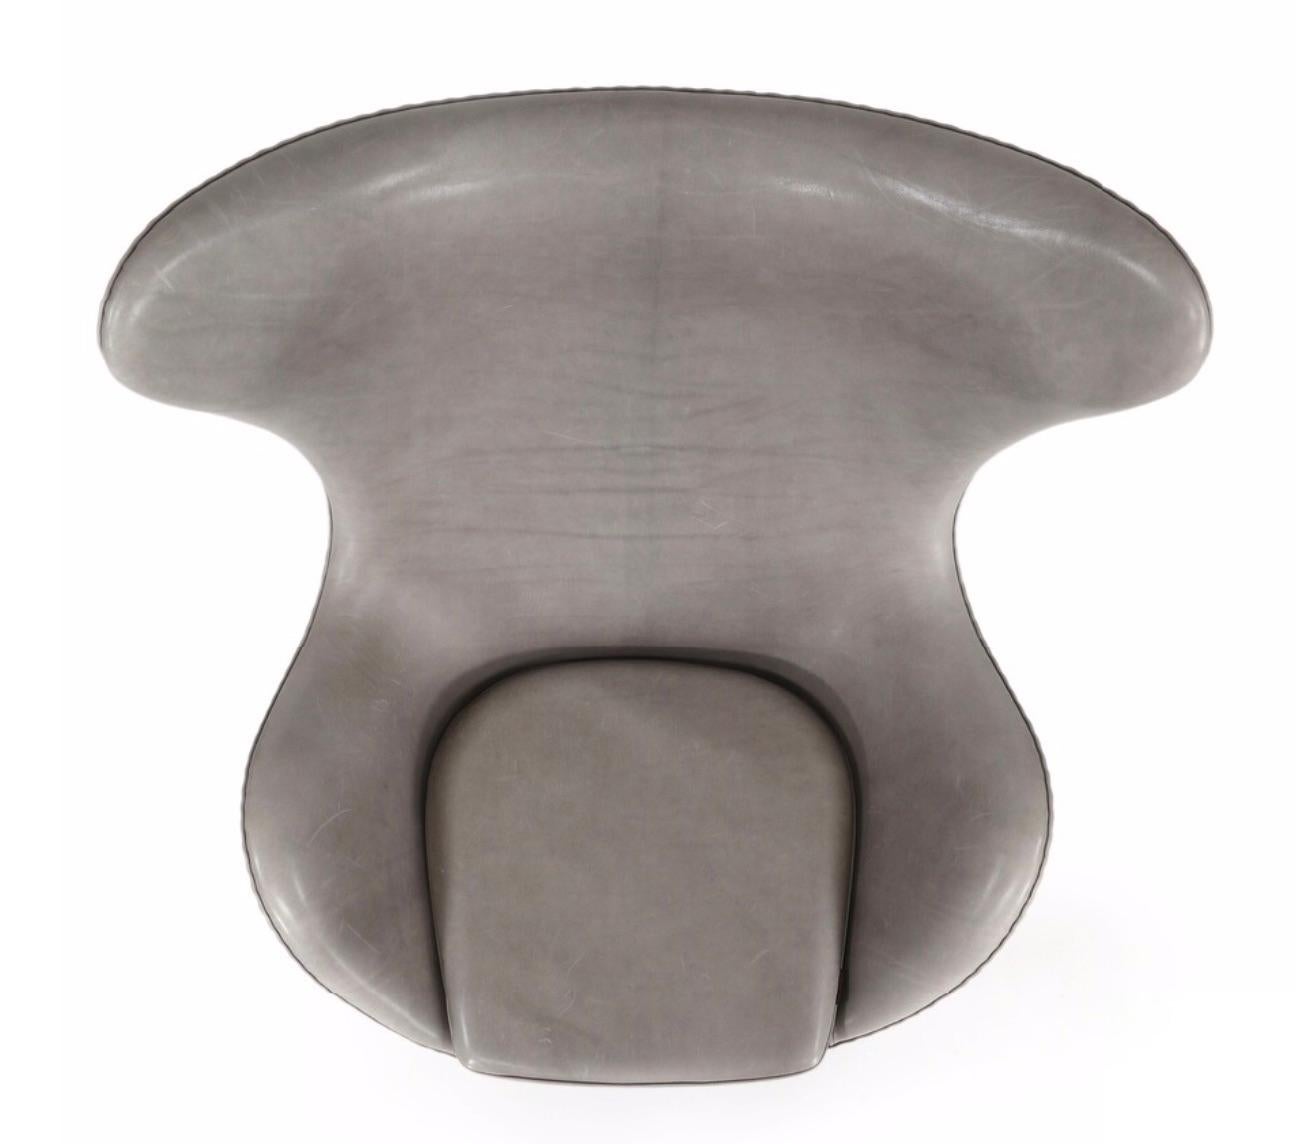 “The Egg Chair”. Easy chair with tilt function. Swivel base of aluminum. Seat, sides and back upholstered with grey leather(embrace, concrete). Model 3316. Designed 1958. Manufactured and marked by Fritz Hansen. 

Stamped serial number: